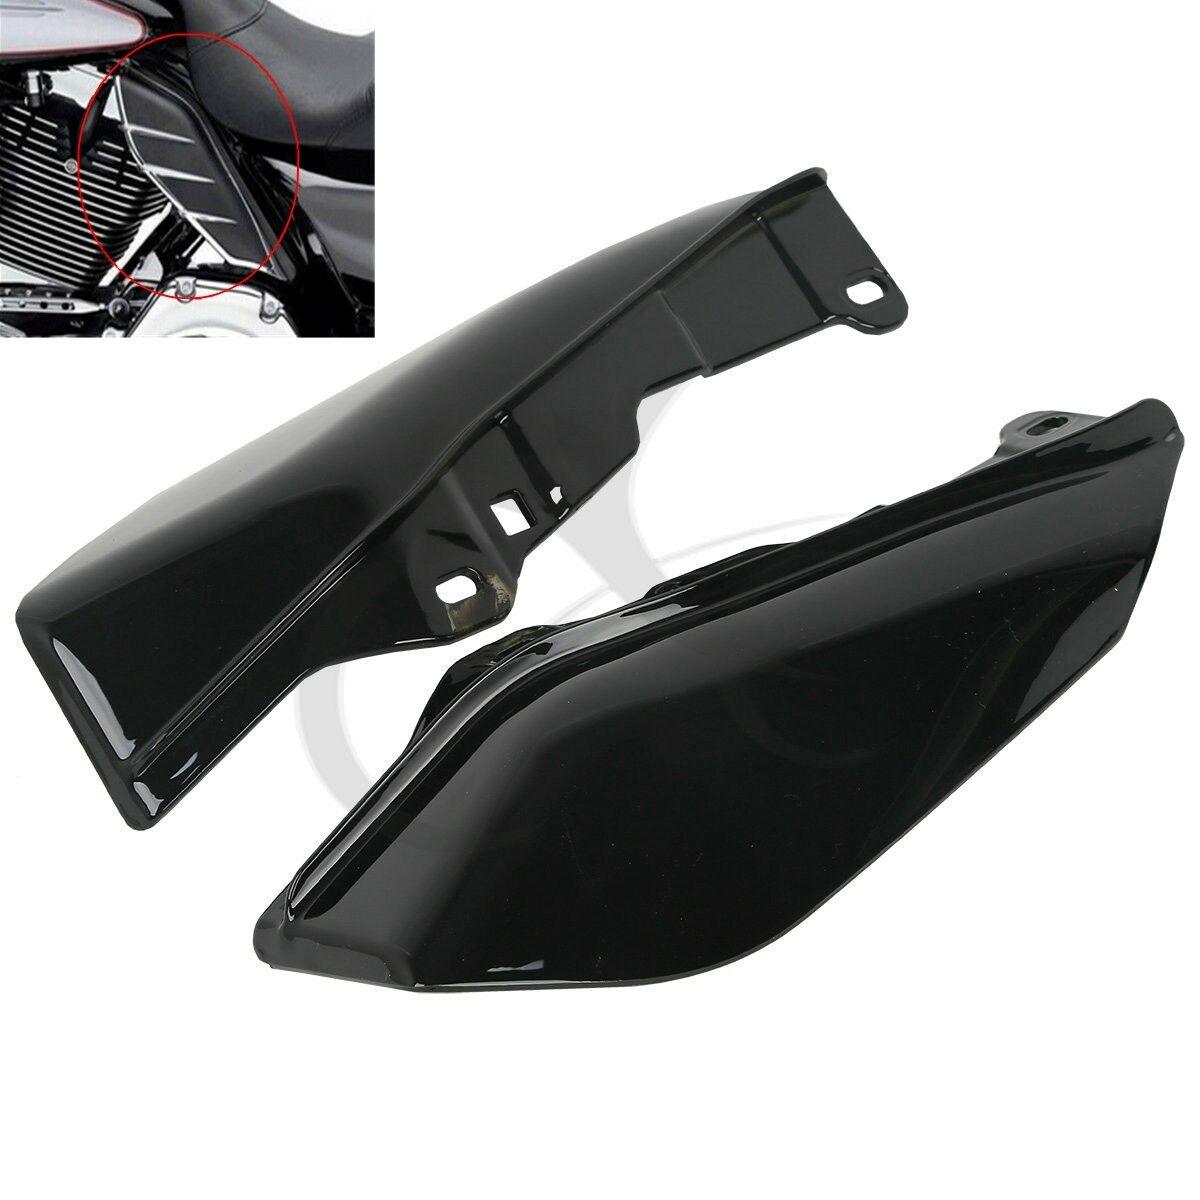 Black ABS Mid-Frame Air Deflector Fit For Harley Electra Street Road Glide 09-16 - Moto Life Products